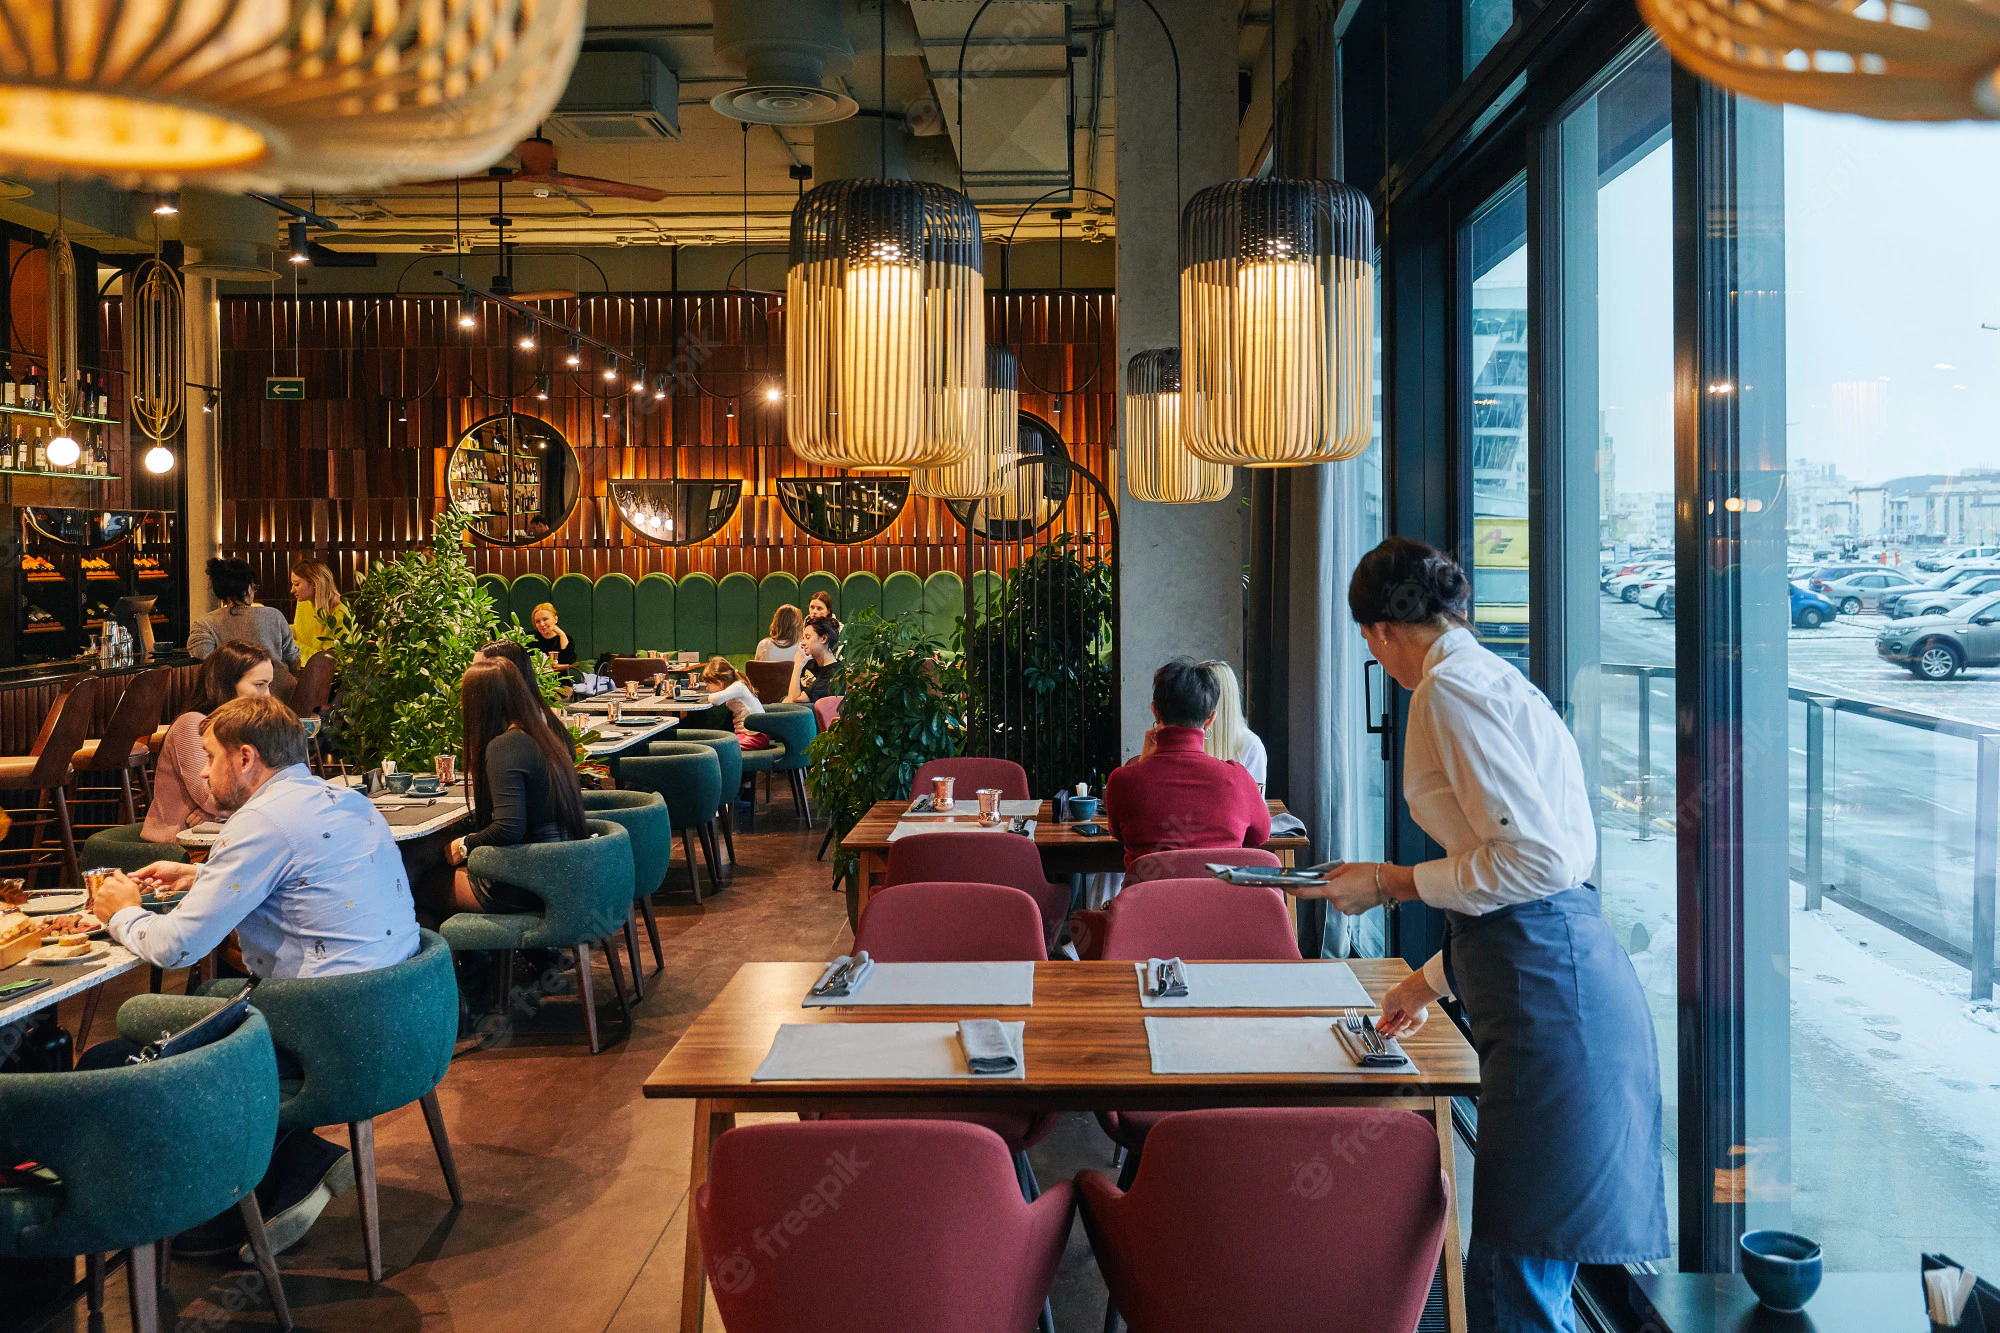 Embracing Key Factors For the Restaurant Industry